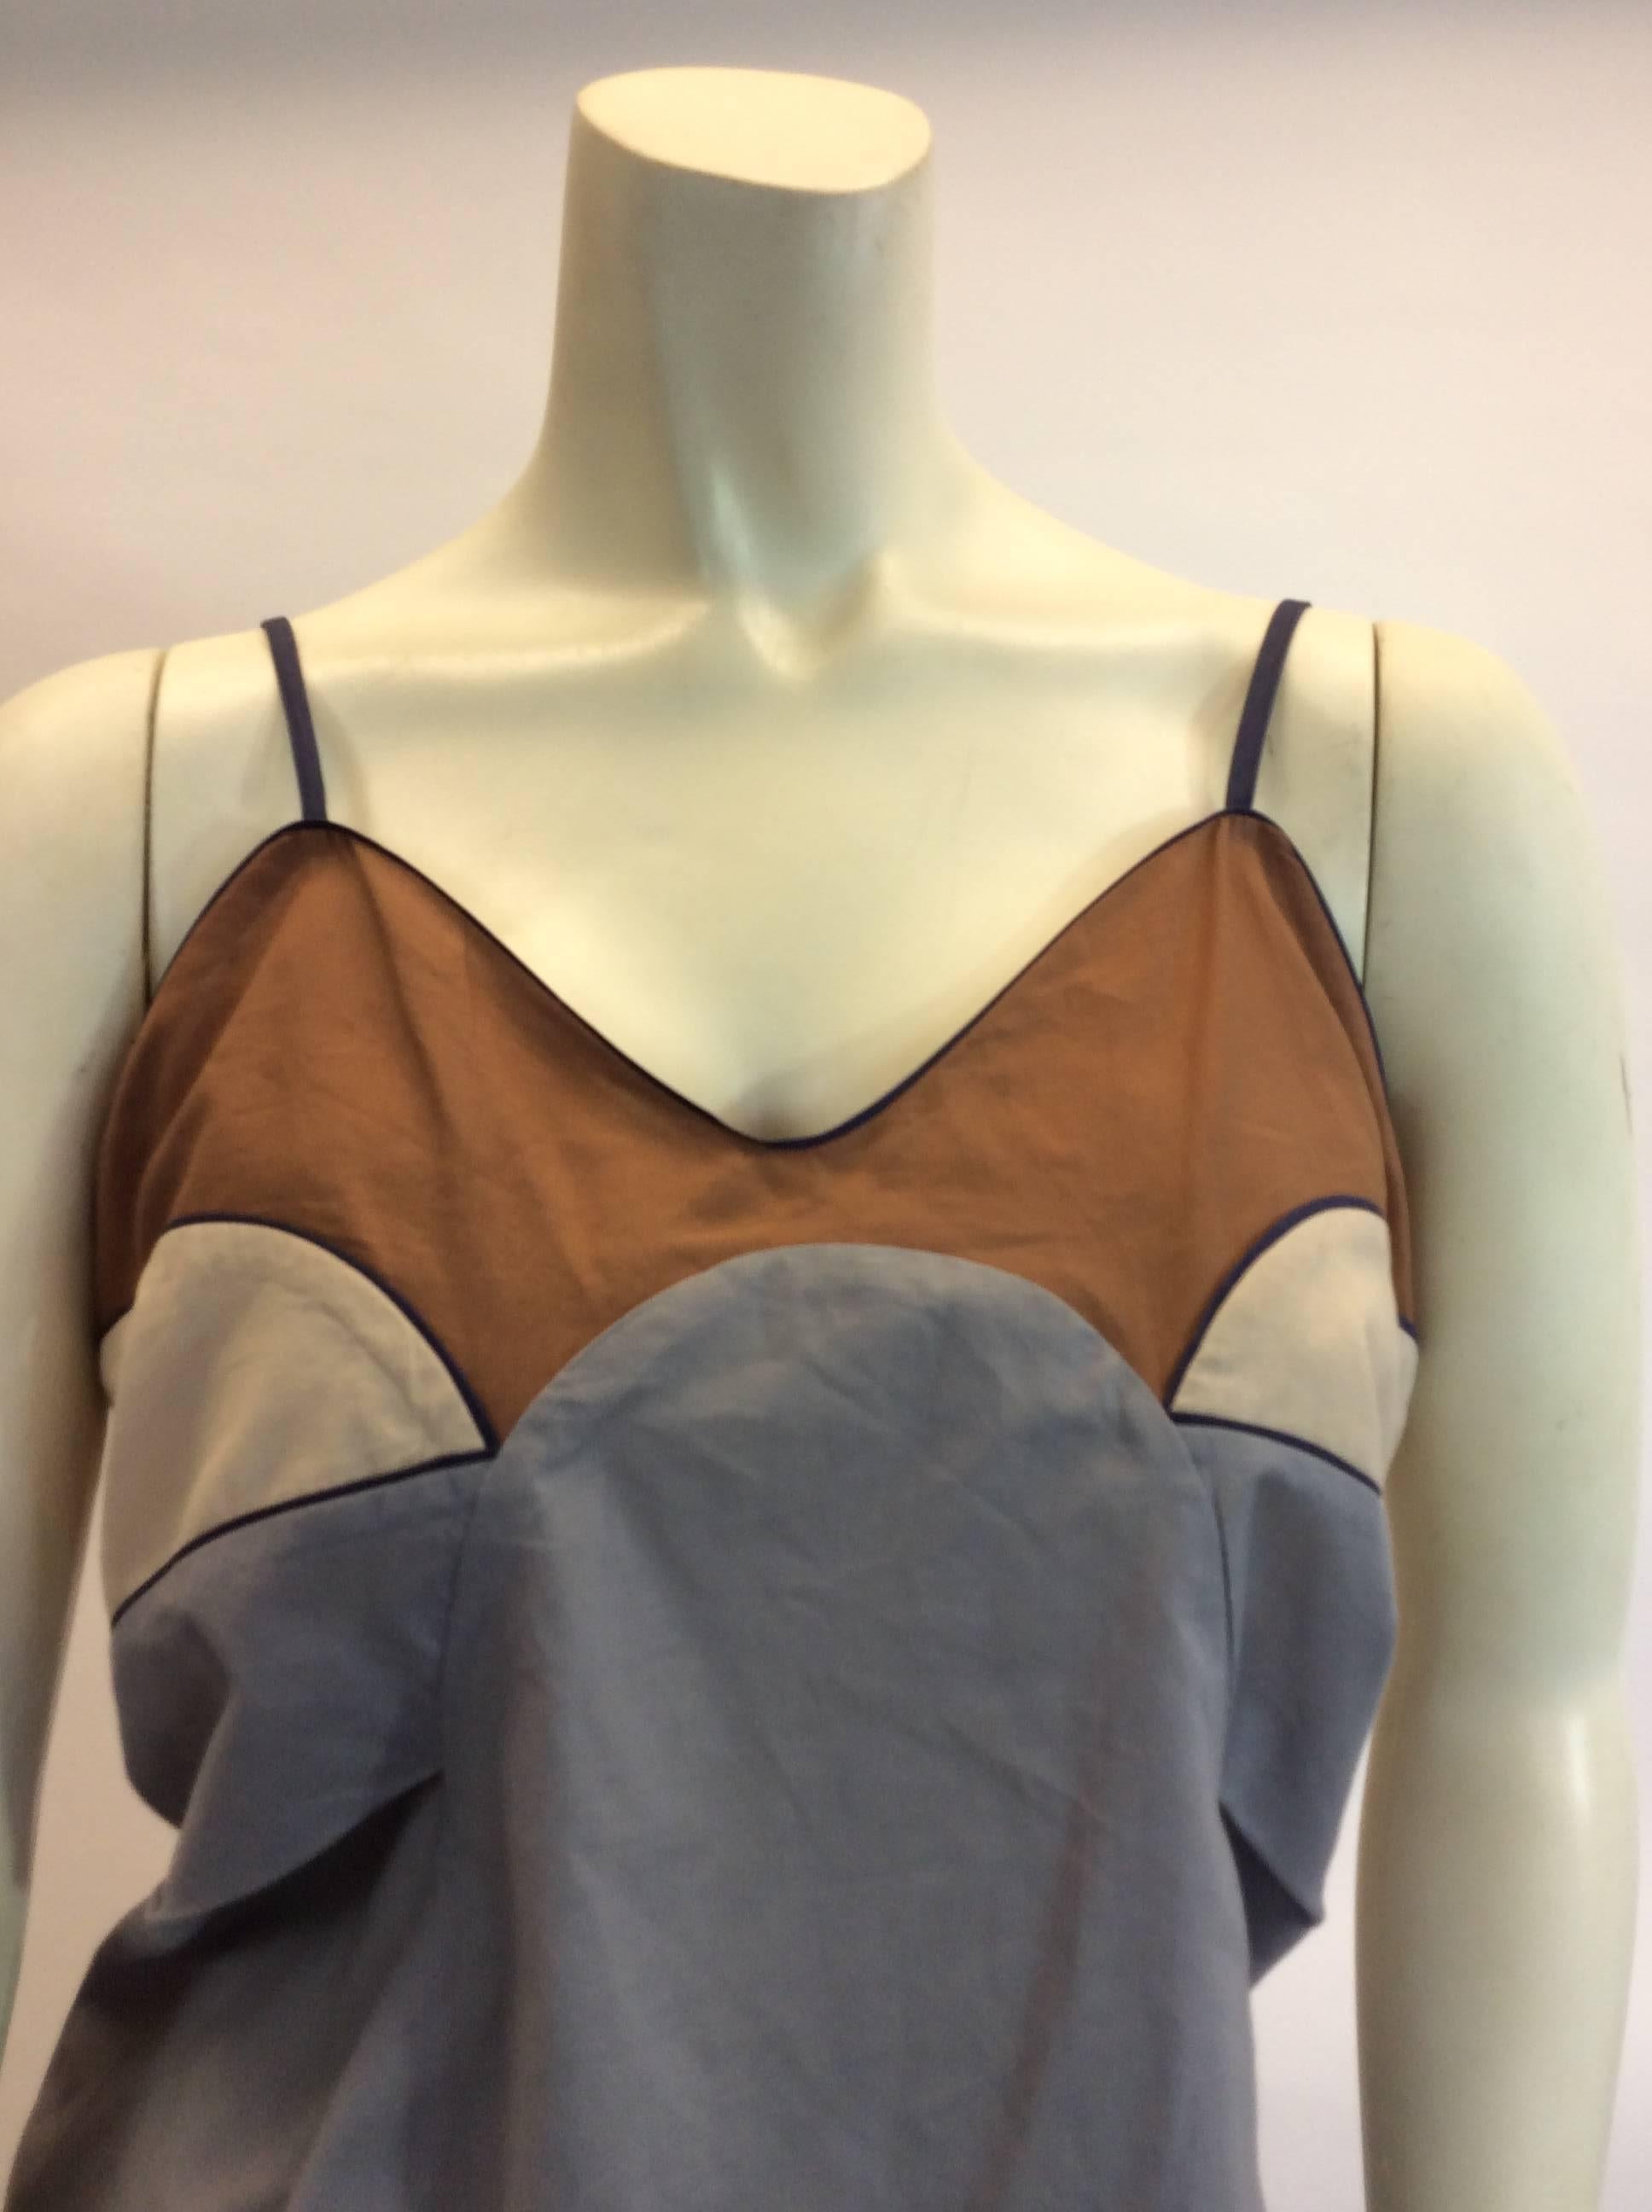 Marni Navy Trim Tank
Features tan, cream and gray color blocks
18 32 32
Made in italy
Size 42
100% cotton